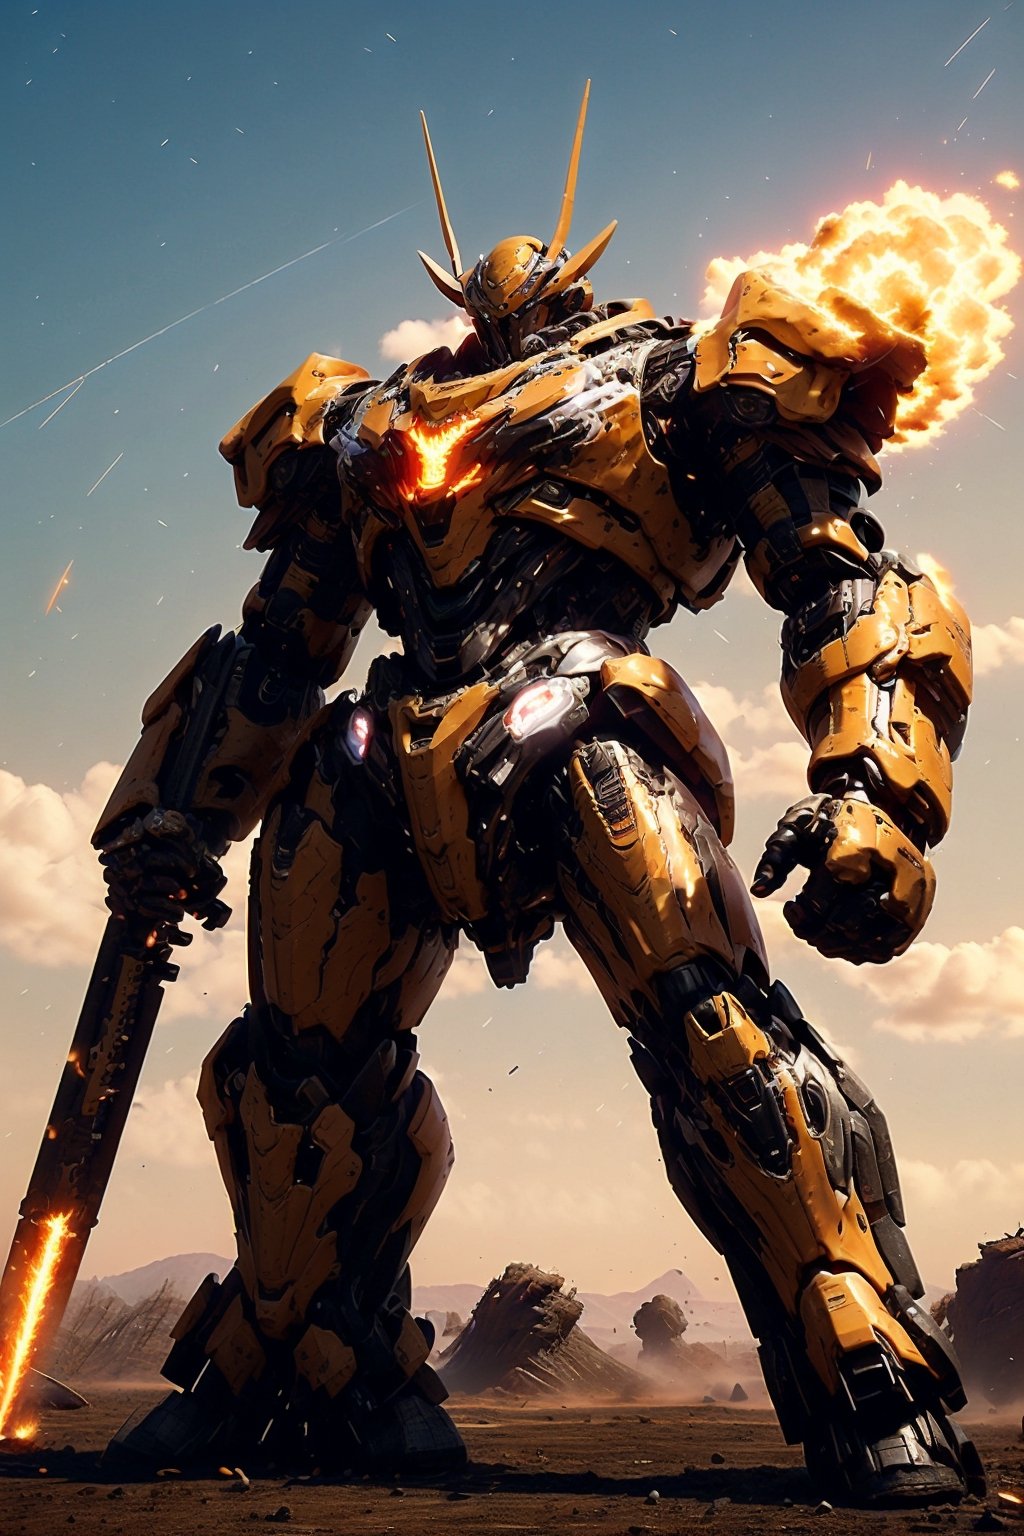 Create an awe-inspiring scene featuring a colossal mech, towering over a war-torn landscape, its metallic frame gleaming in the fiery glow of battle. The mech exudes an aura of power and dominance, adorned with intricate designs and glowing energy cores pulsating with untapped potential. Its massive limbs are equipped with formidable weaponry, crackling with energy ready to unleash devastation upon its enemies. Surrounding the mech are swirling clouds of dust and debris, stirred up by the sheer force of its movements, as it strides forward with an unstoppable determination, a symbol of unstoppable might in the midst of chaos,photorealistic